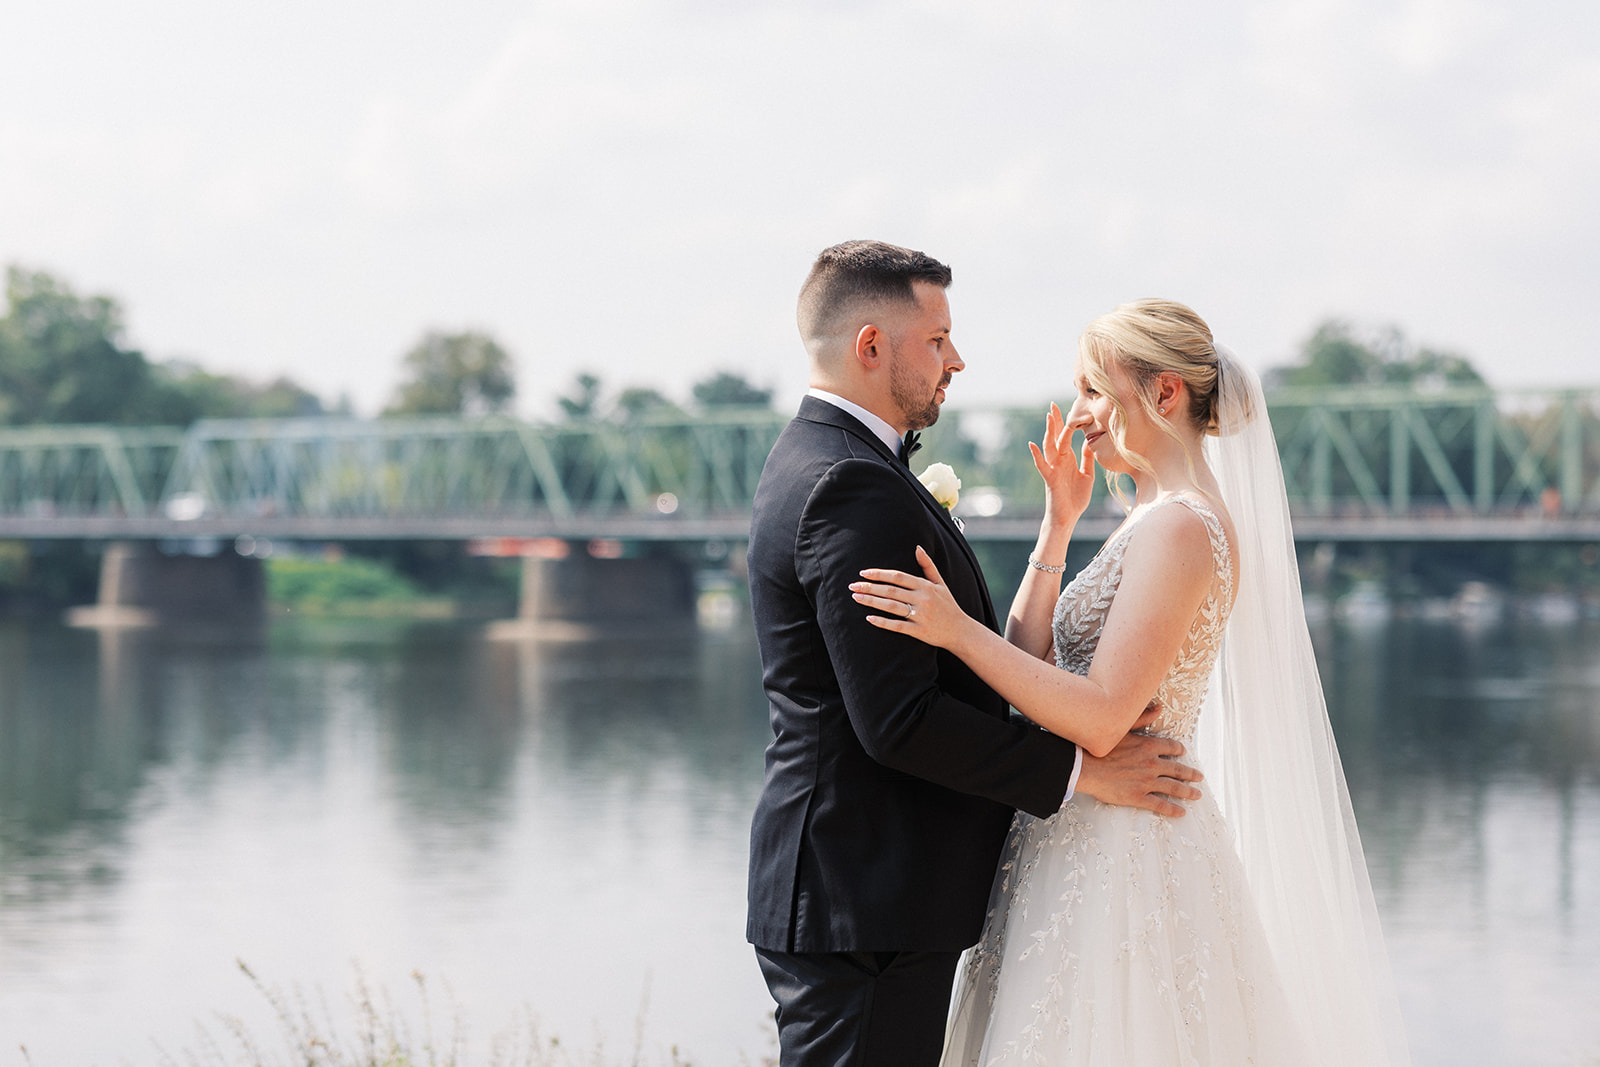 A bride wipes away tear as she stands with her groom on a river bank during their Lambertville Station Wedding first look